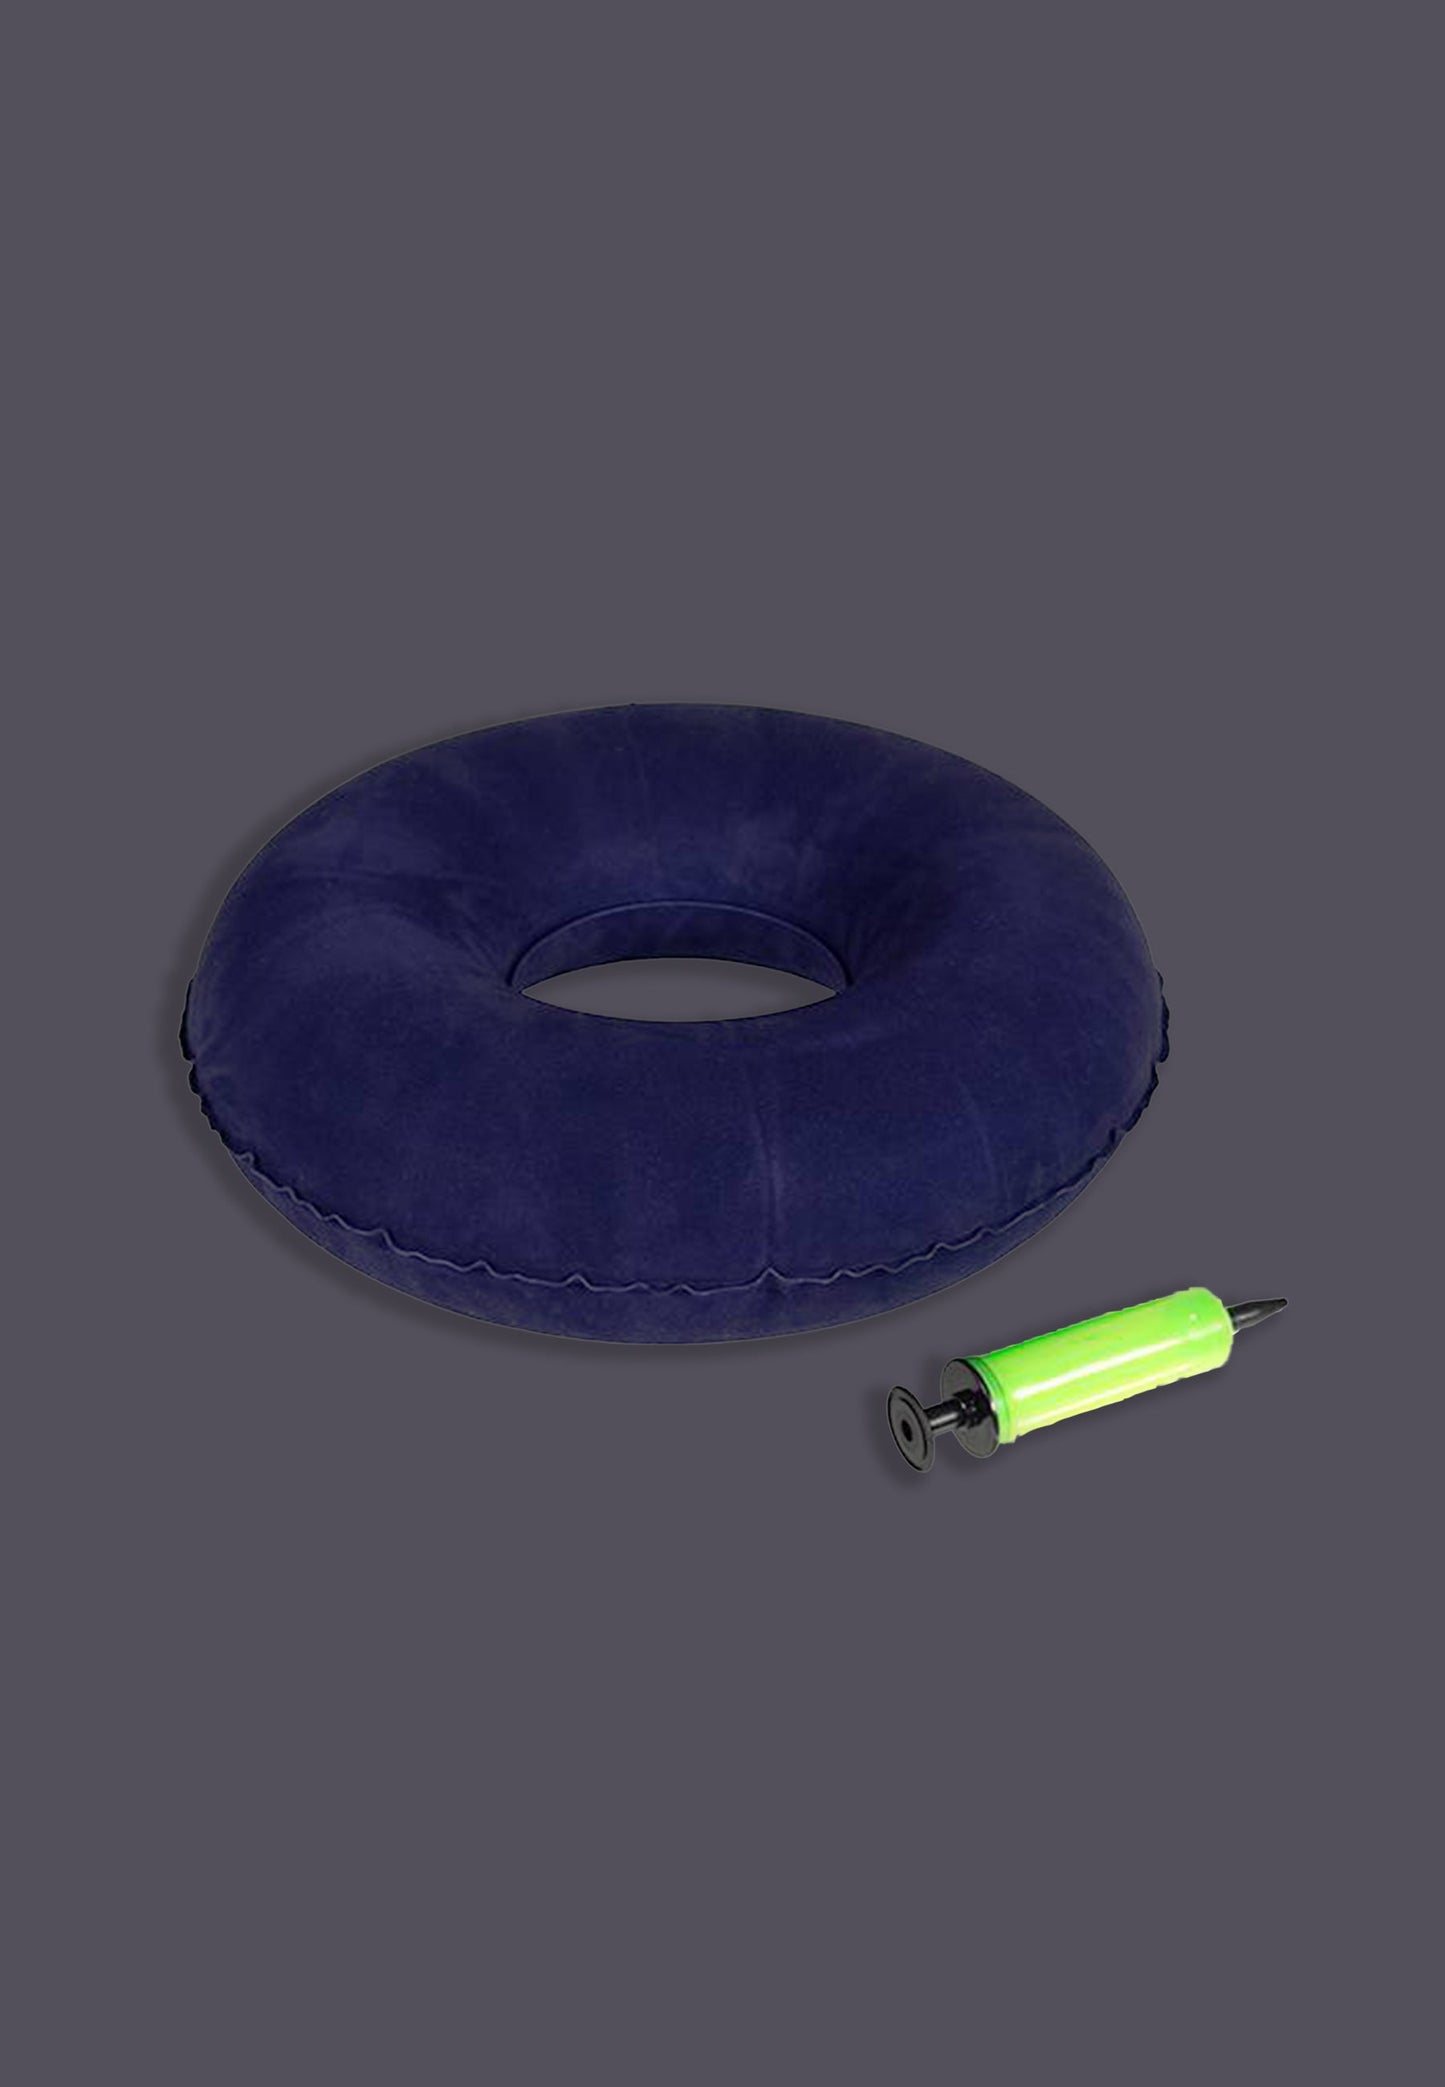 Circle Cushion inflatable with pump